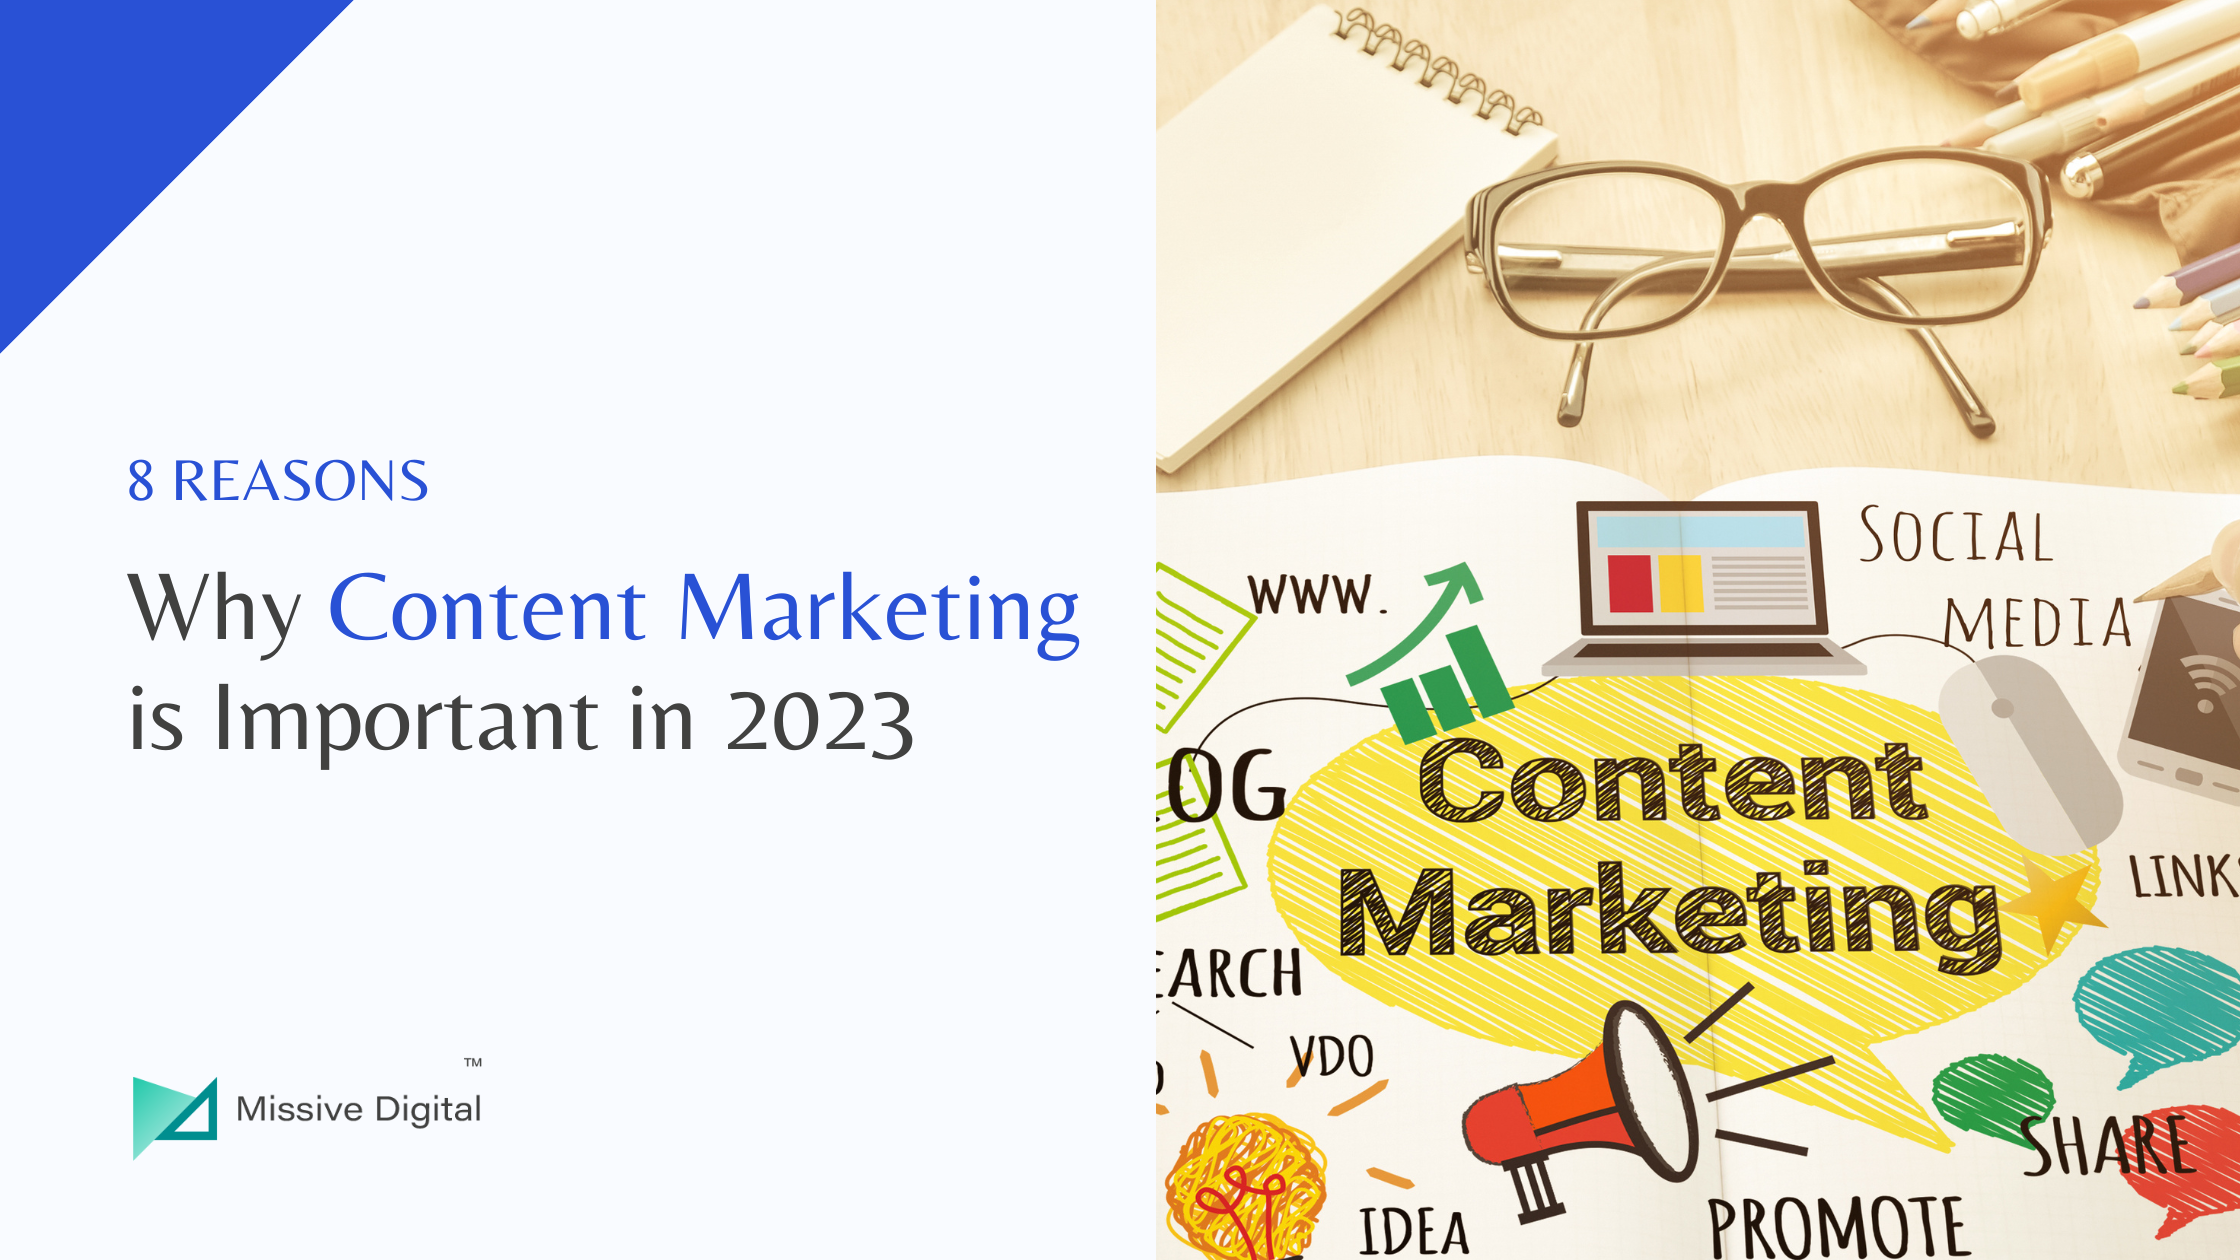 Why Content Marketing is Important in 2023